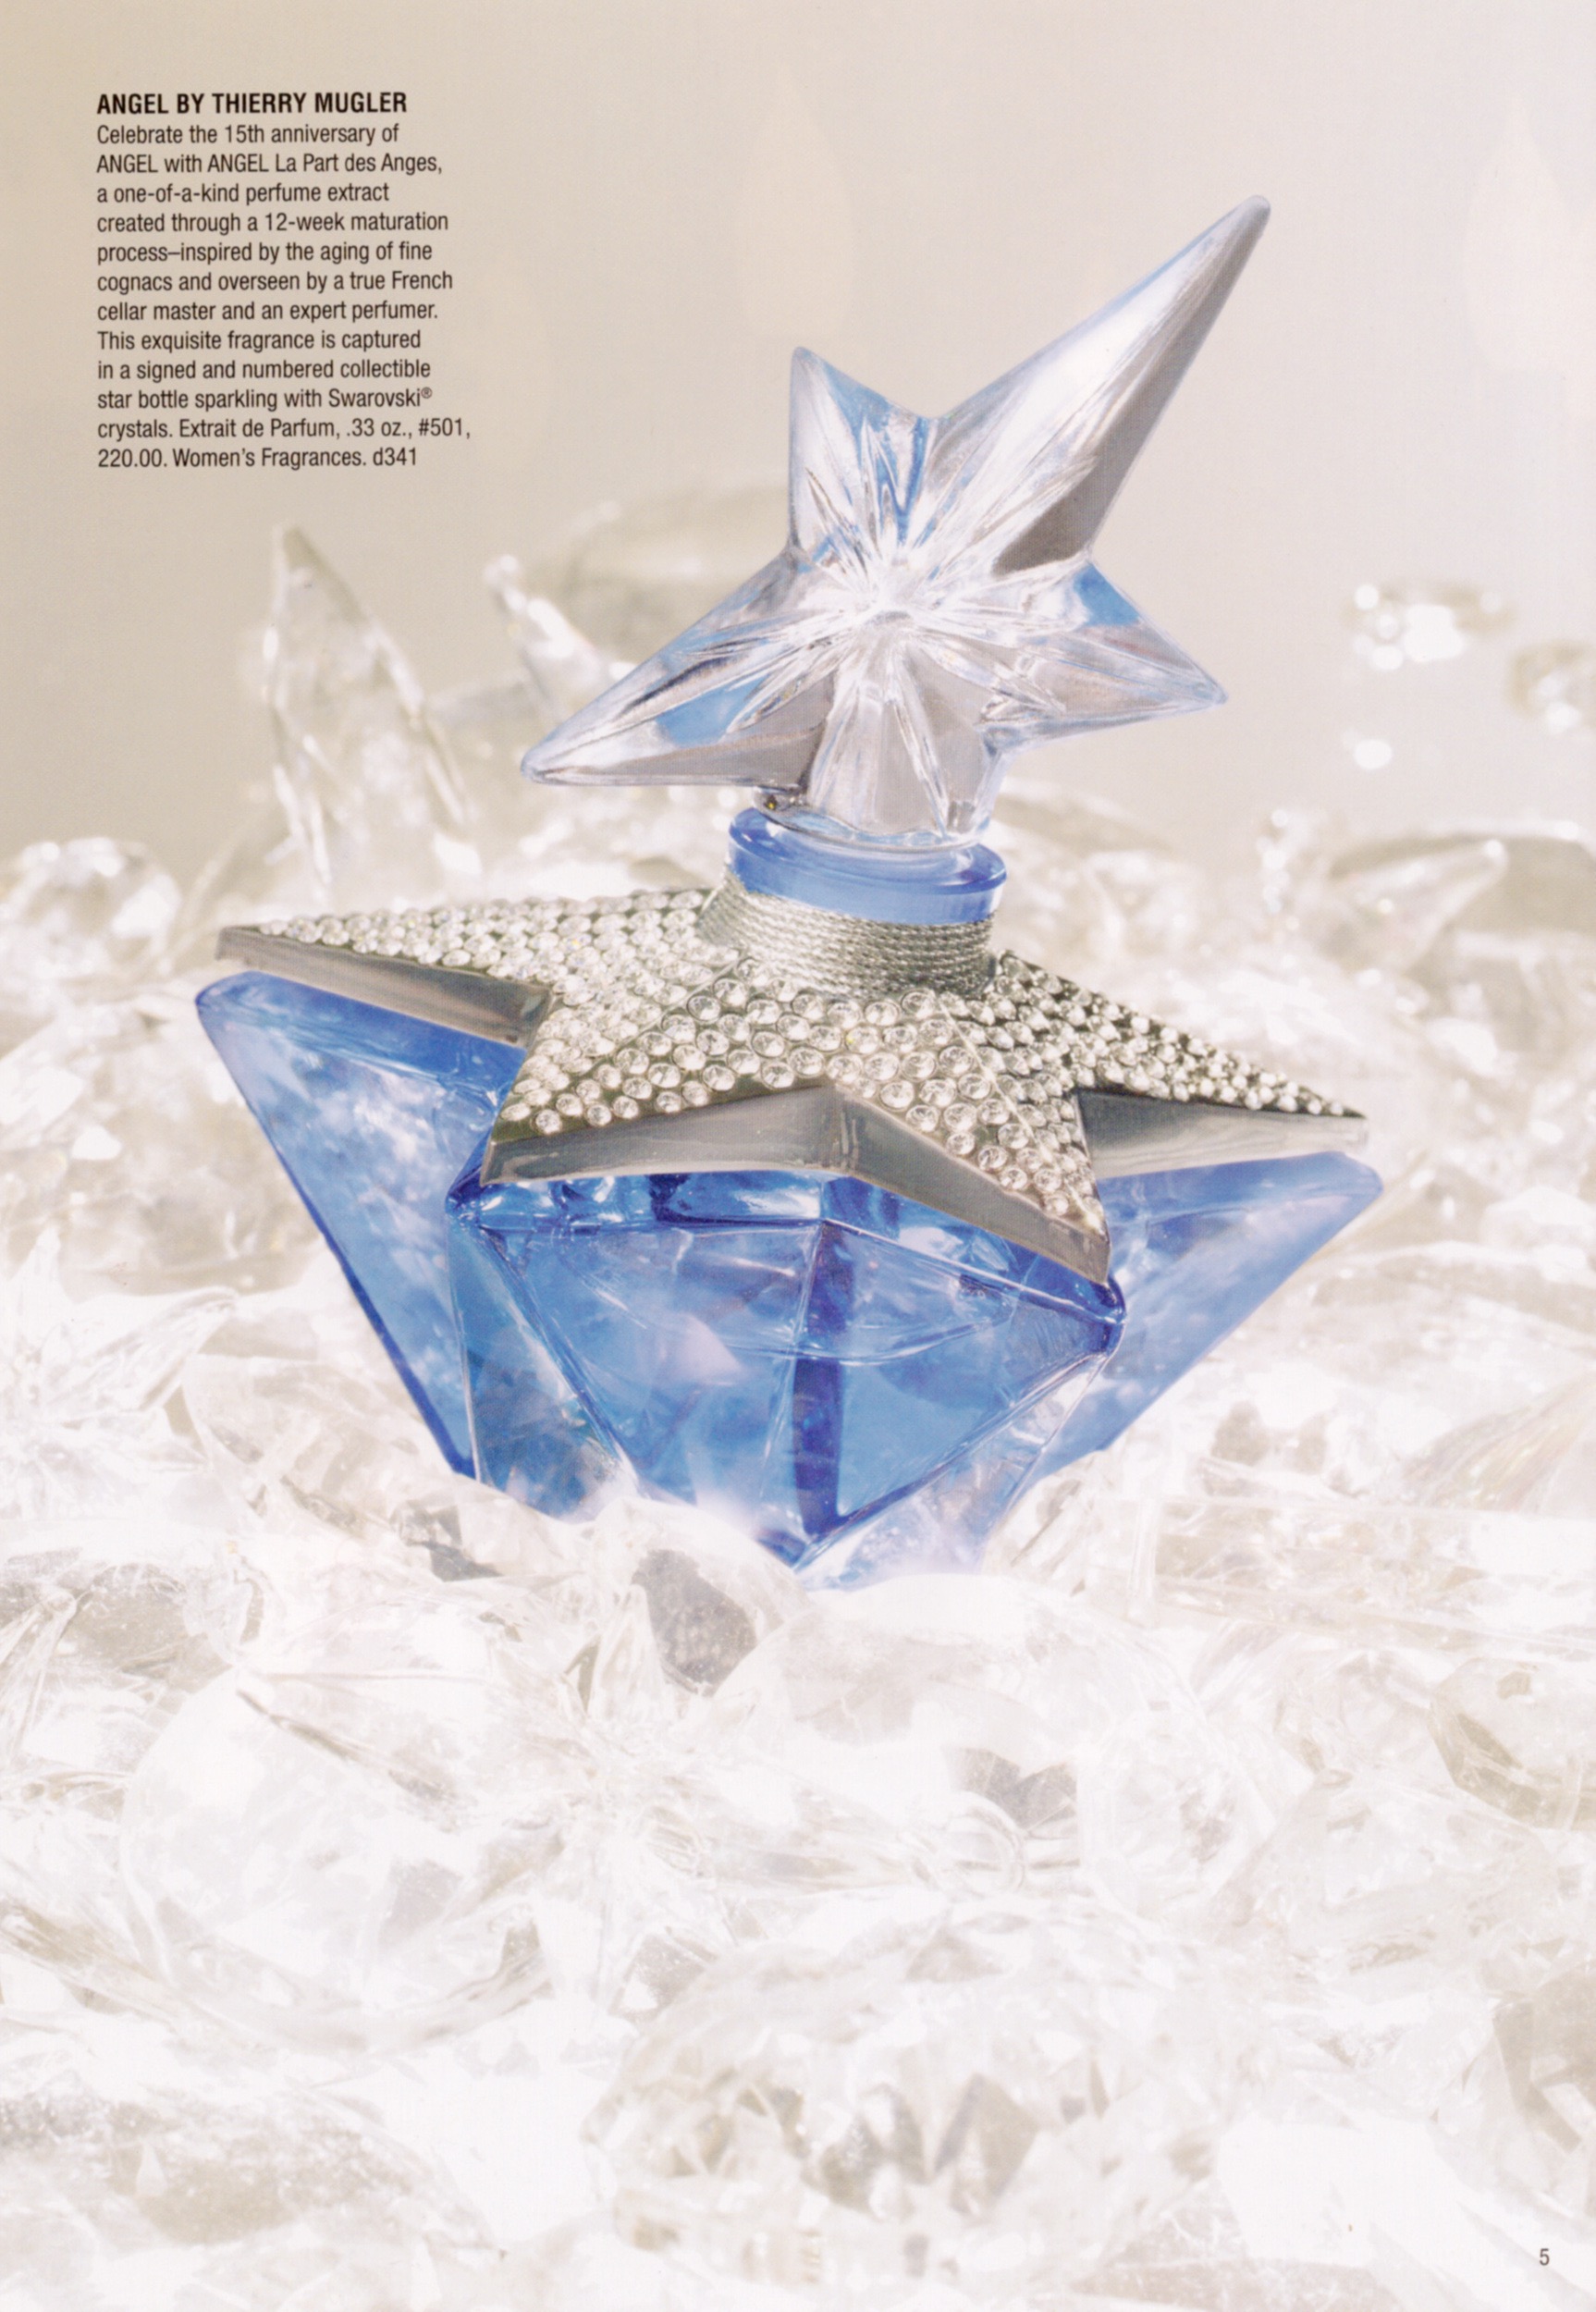 Thierry Mugler Angel Perfume La Part des Anges Angels Star (Etoile), 2007. Swarovski Crystals. Bottle Collecting Saks Fifth Avenue Catalog Price